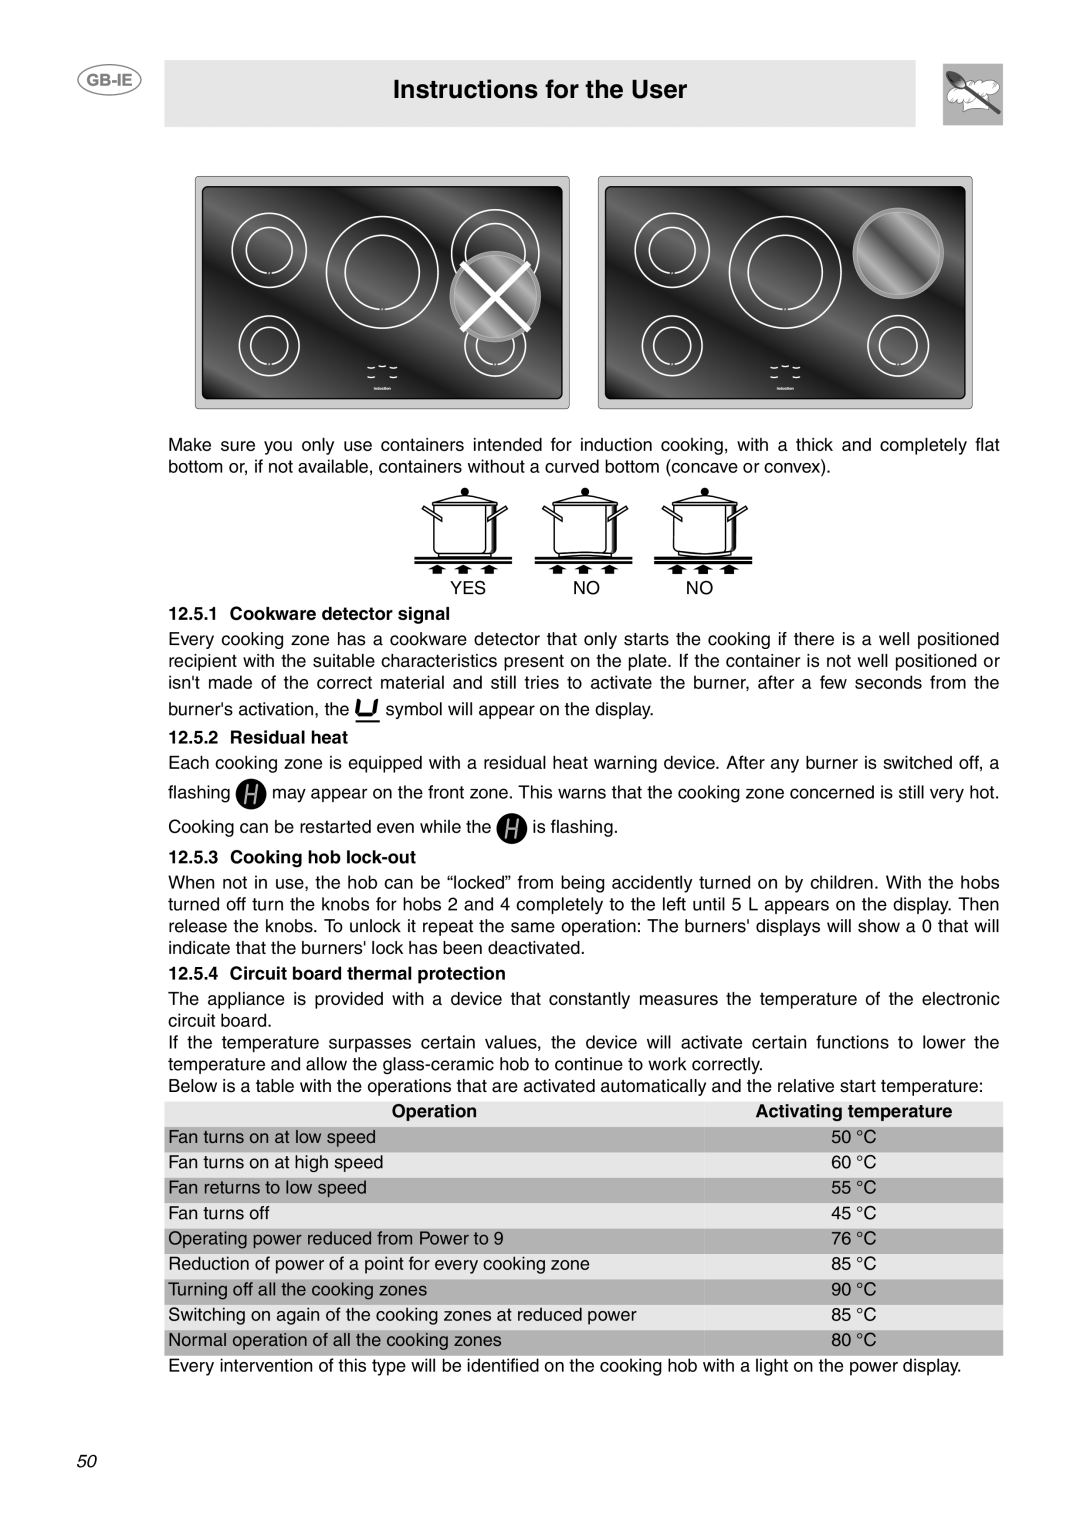 Smeg CE9IMX manual Instructions for the User, Cookware detector signal, Residual heat, Cooking hob lock-out, Operation 